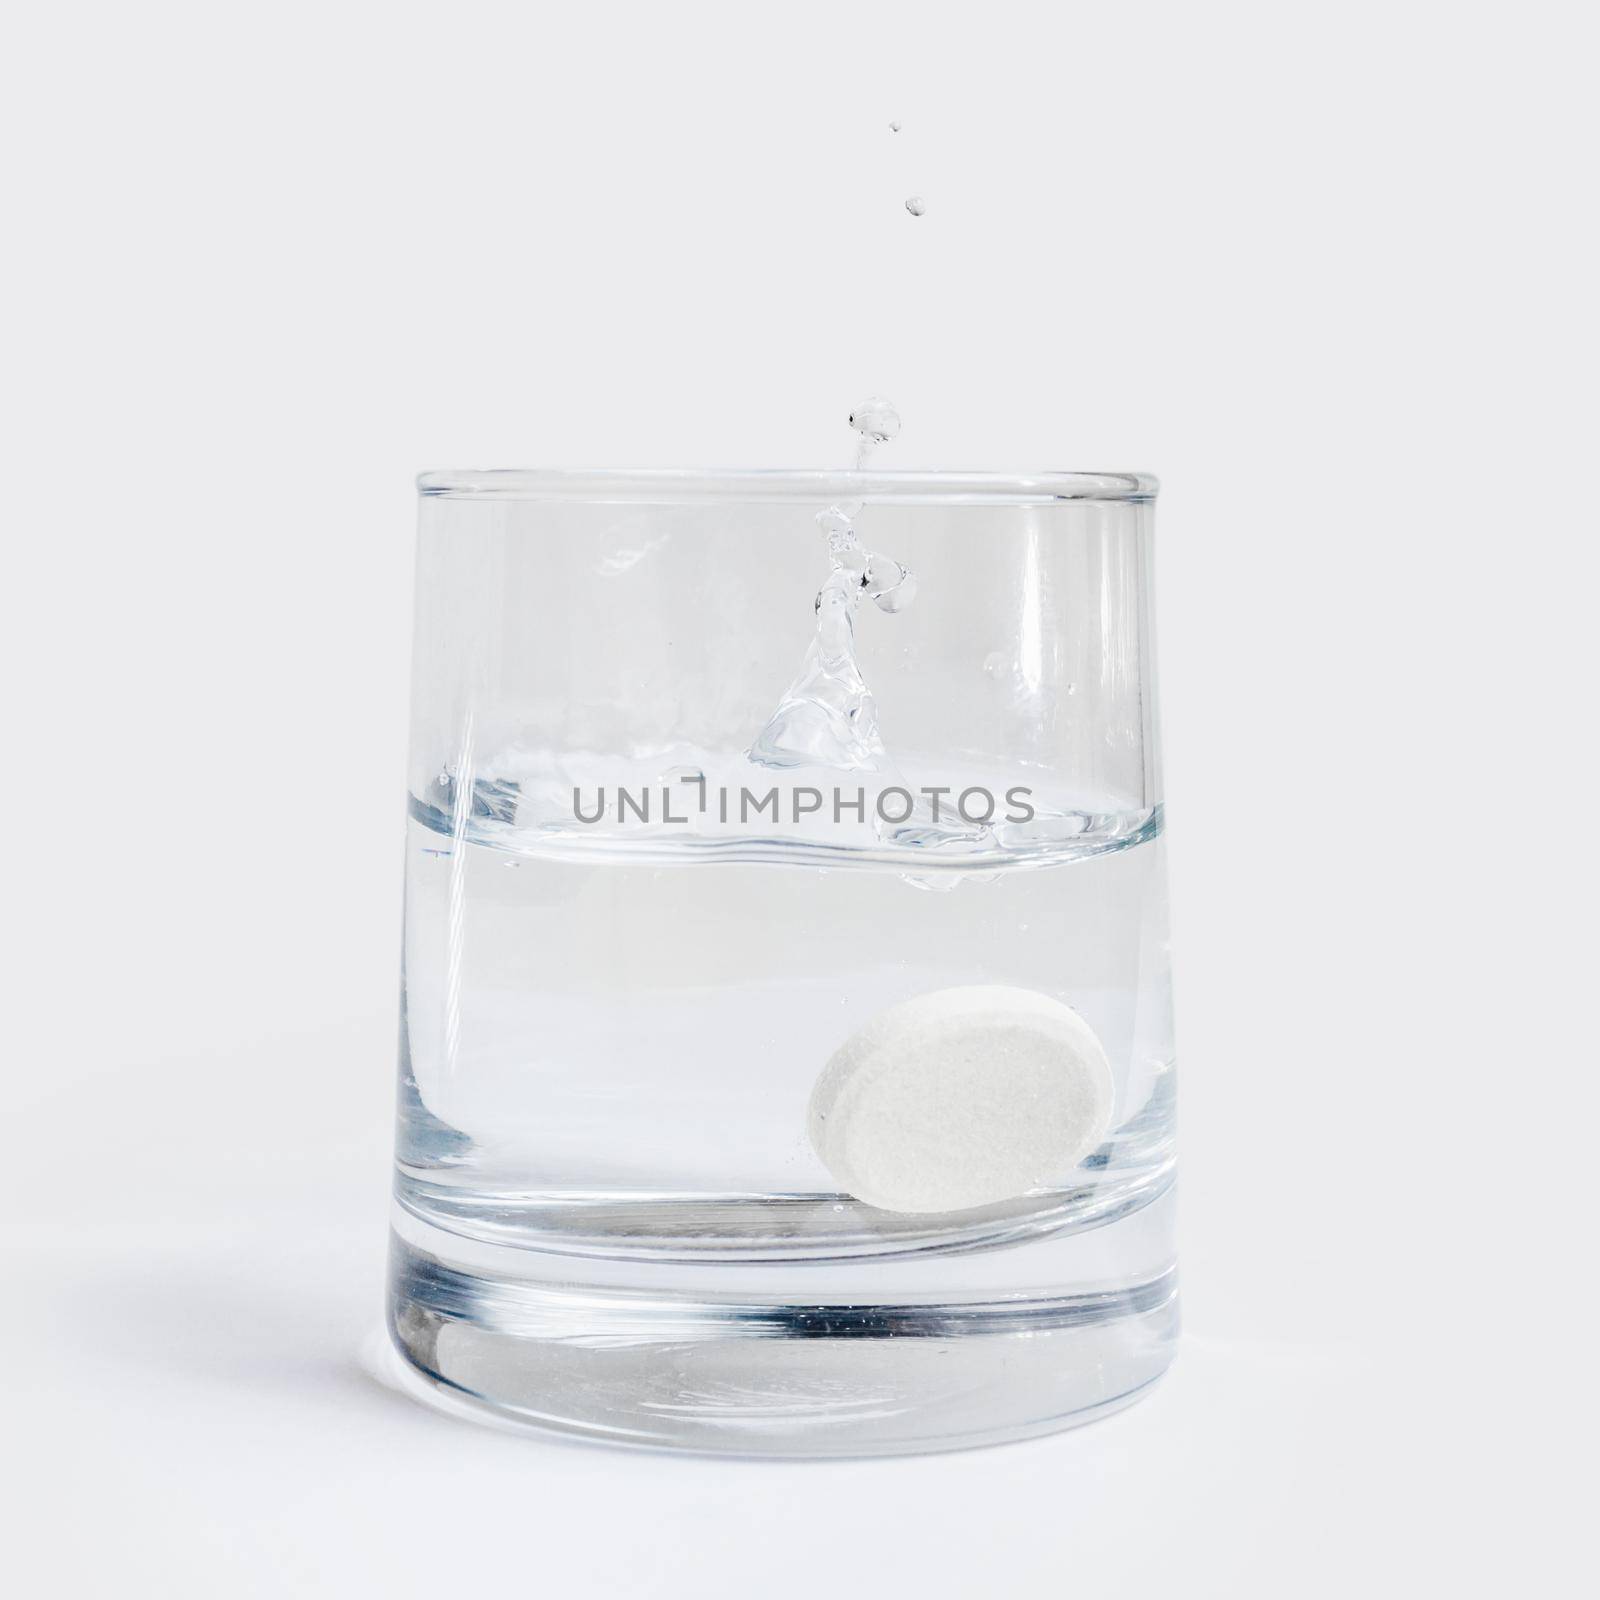 Drug dissolved in a glass of water on a white table